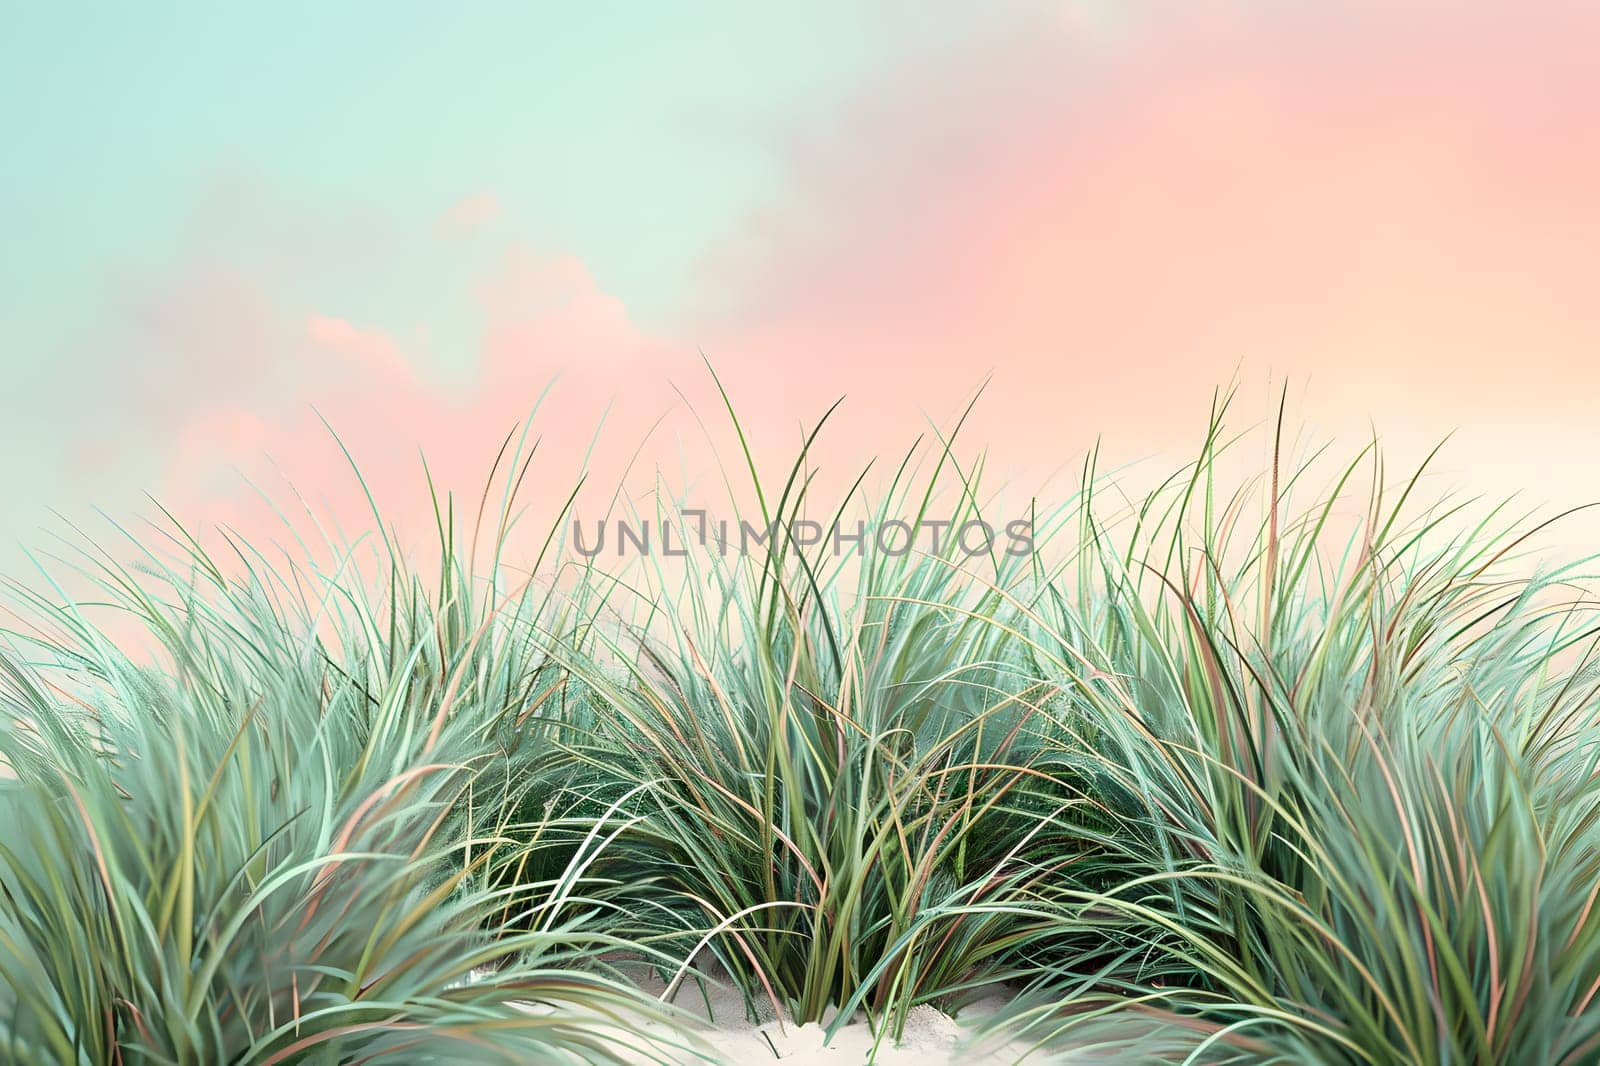 A natural landscape with tall grass growing on a sand dune under the vast sky. The terrestrial plant belongs to the grass family, creating a beautiful grassland horizon